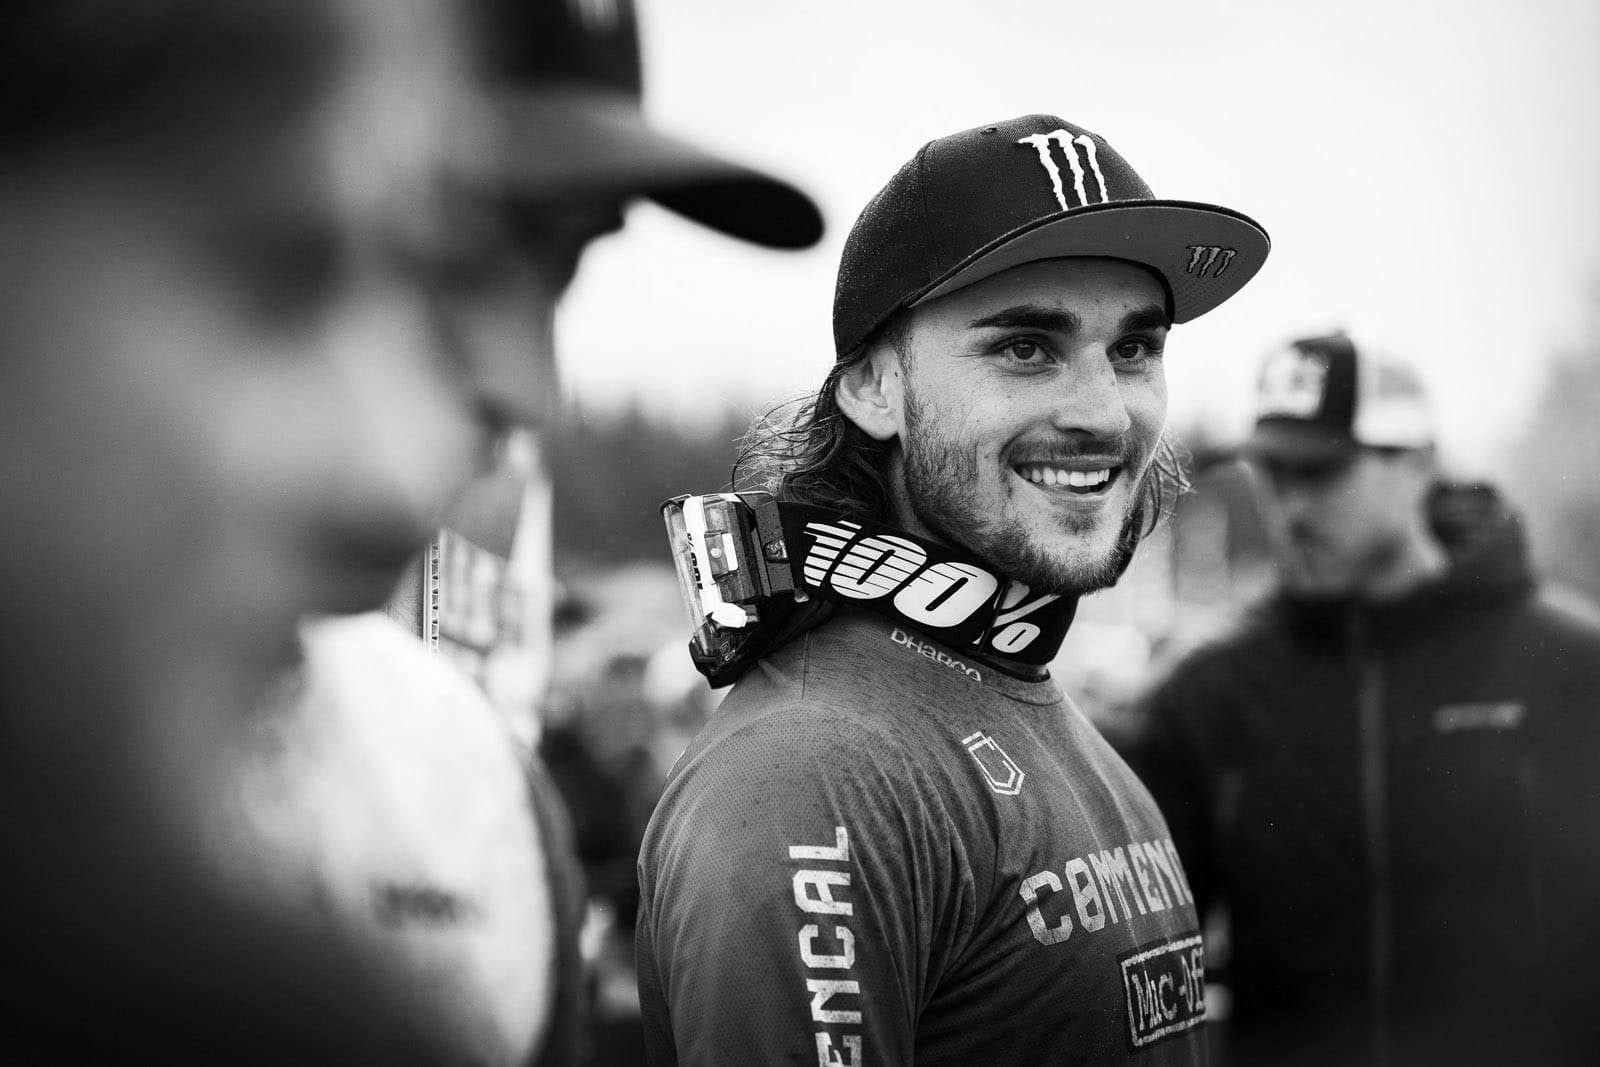 Thibaut Dapréla couldn't have looked happier for his teammate's win, even though it would otherwise have been his. Quality sportsmanship and true downhill spirit right there. – Seb